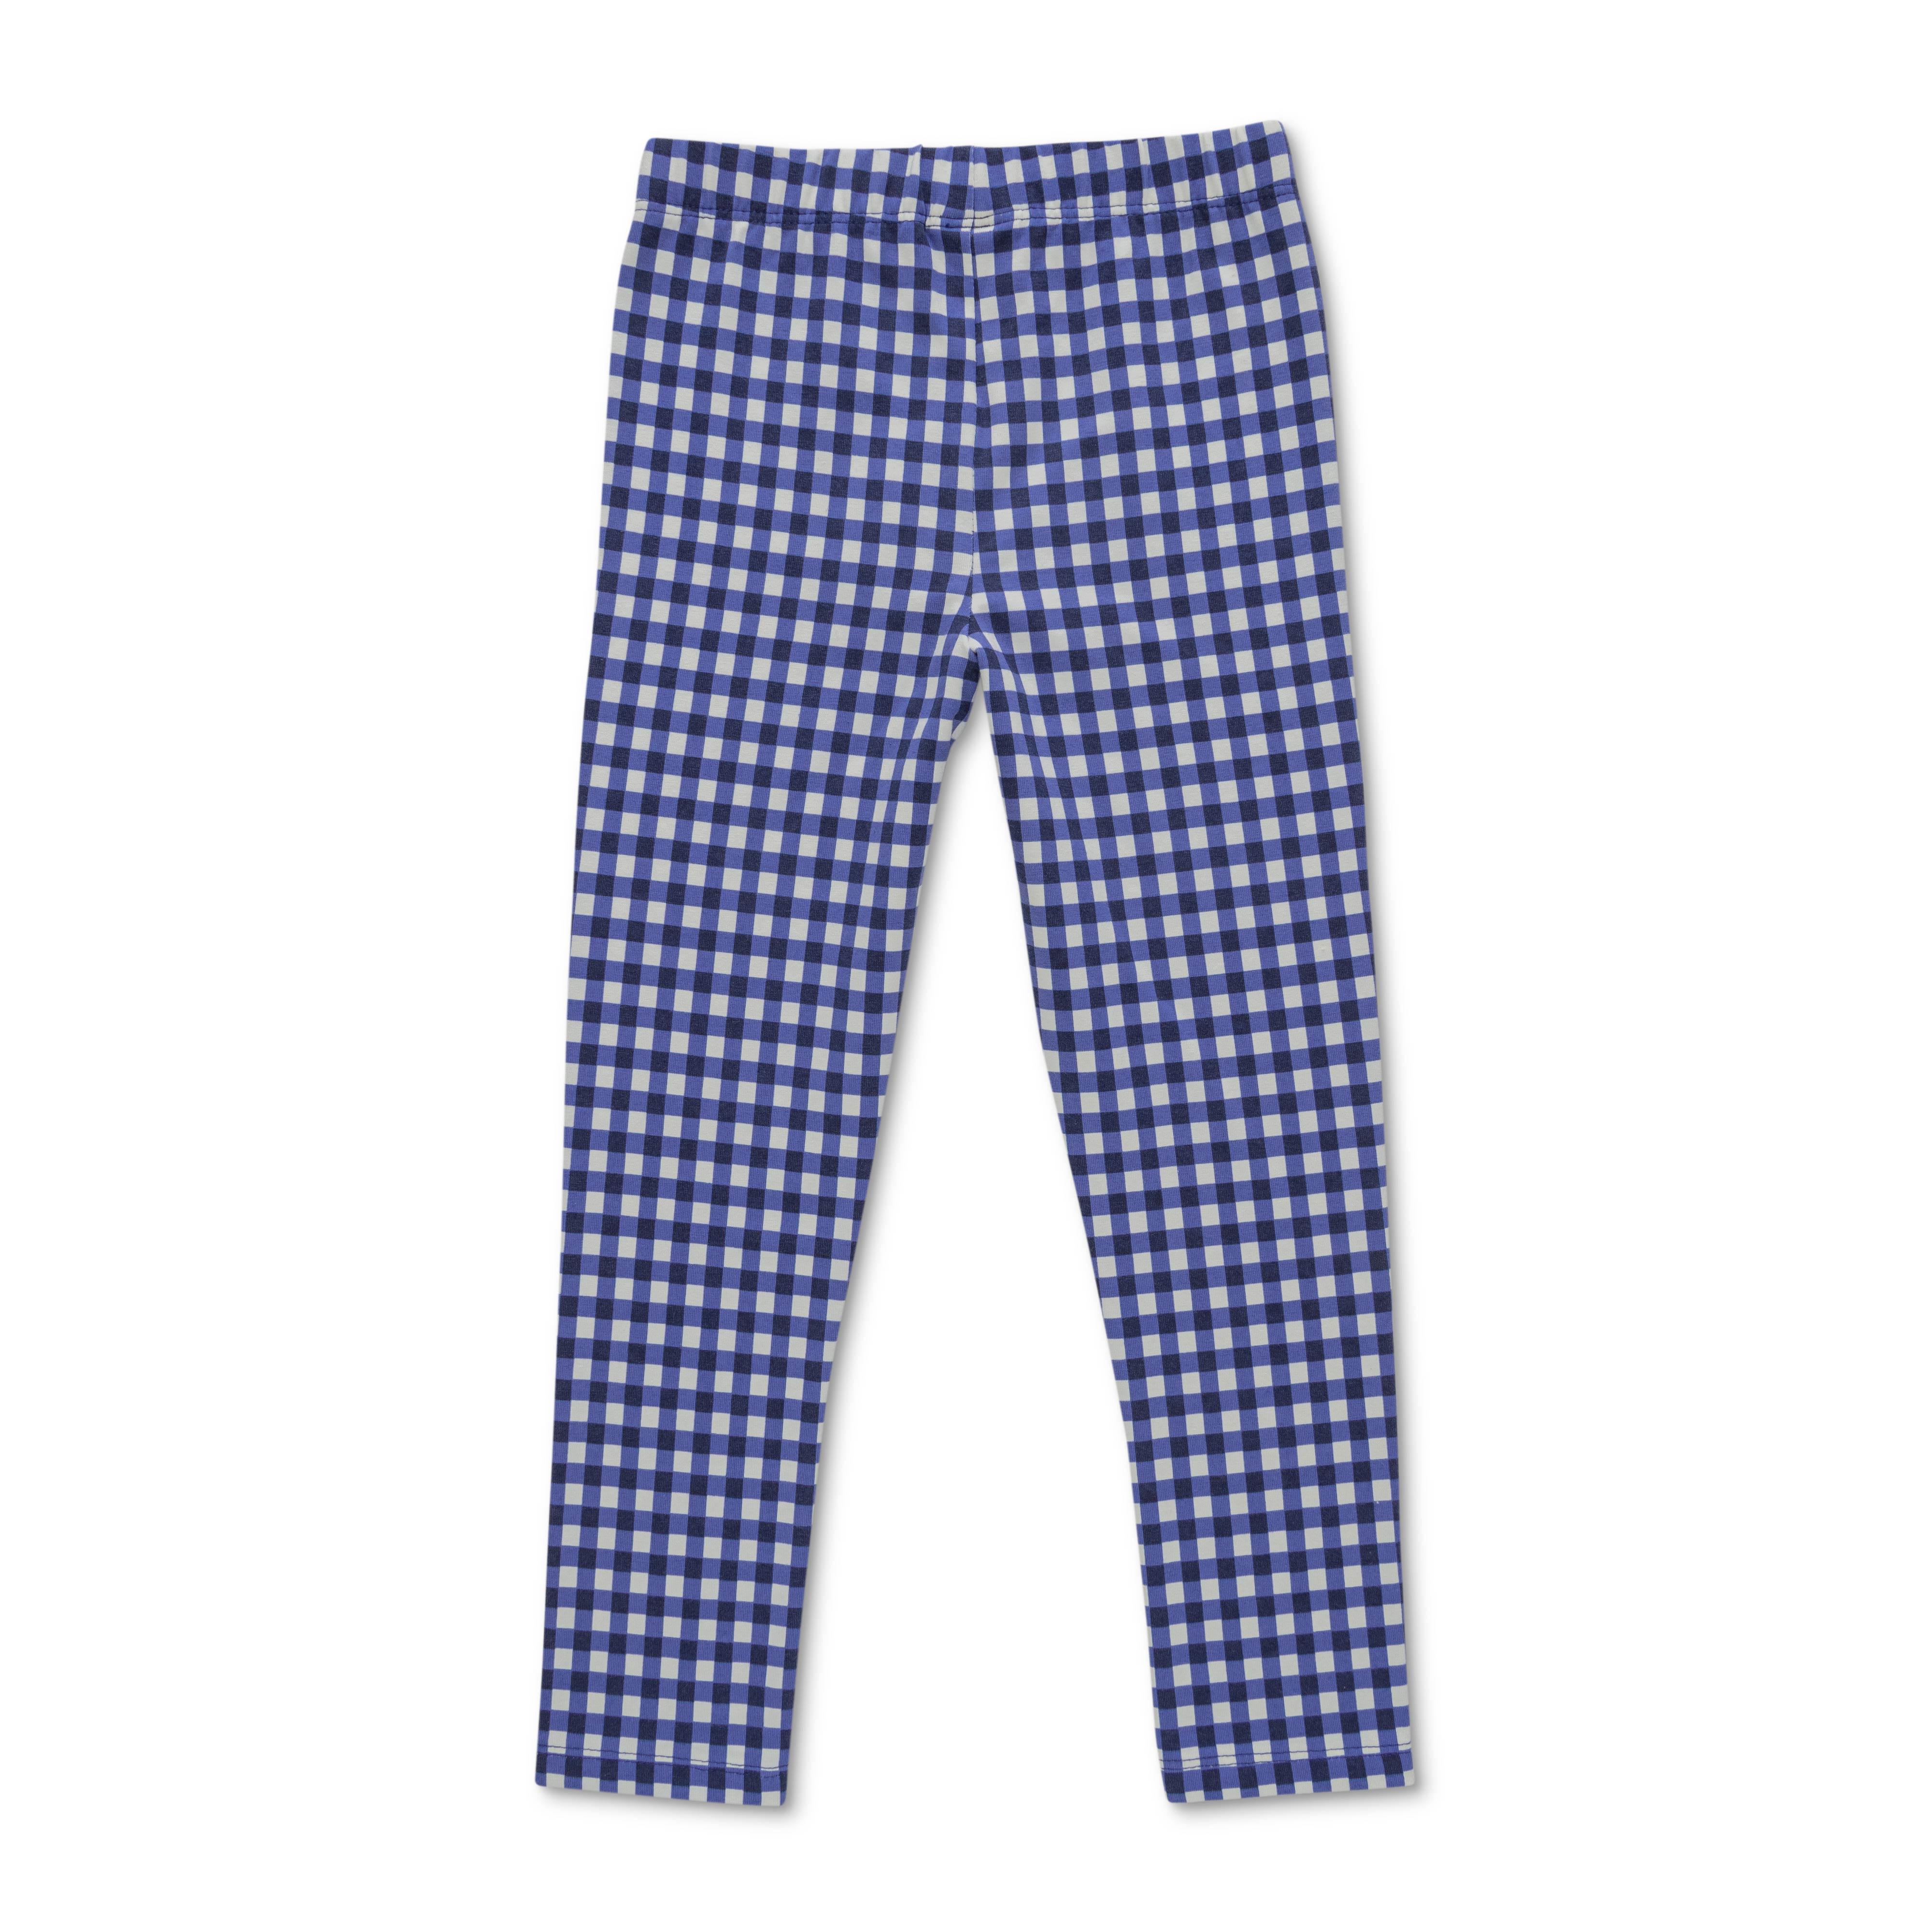 Girls Toddlers Checked Leggings Blue - Juscubs